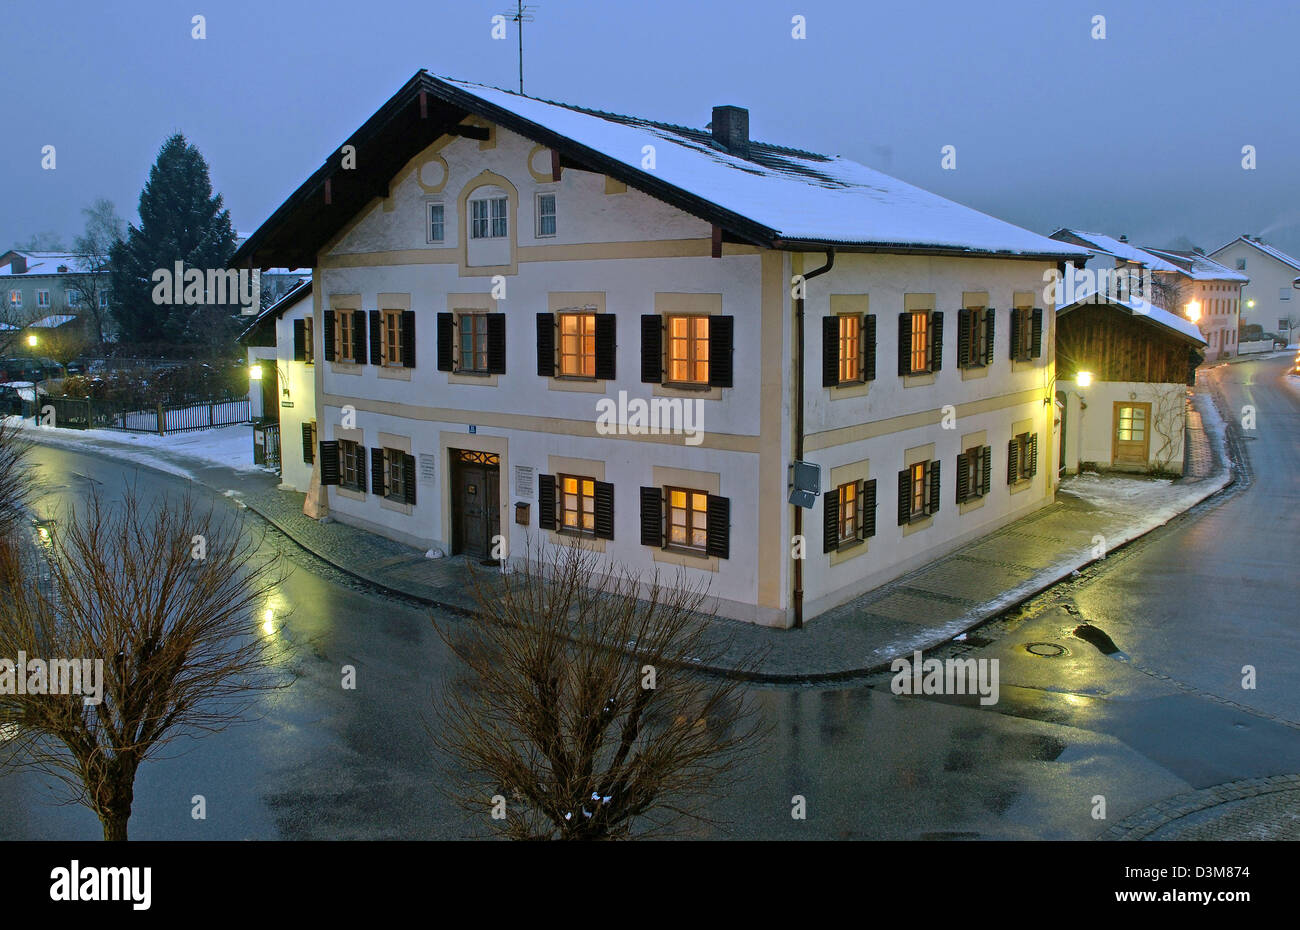 (dpa) - The picture shows the birthplace of Pope Benedict XVI. former cardinal dean Joseph Ratzinger at night in Bavaria's Marktl am Inn, Germany, 23 December 2005. Ratzinger was born in this house on 19 April 1927. Photo Armin Weigel Stock Photo